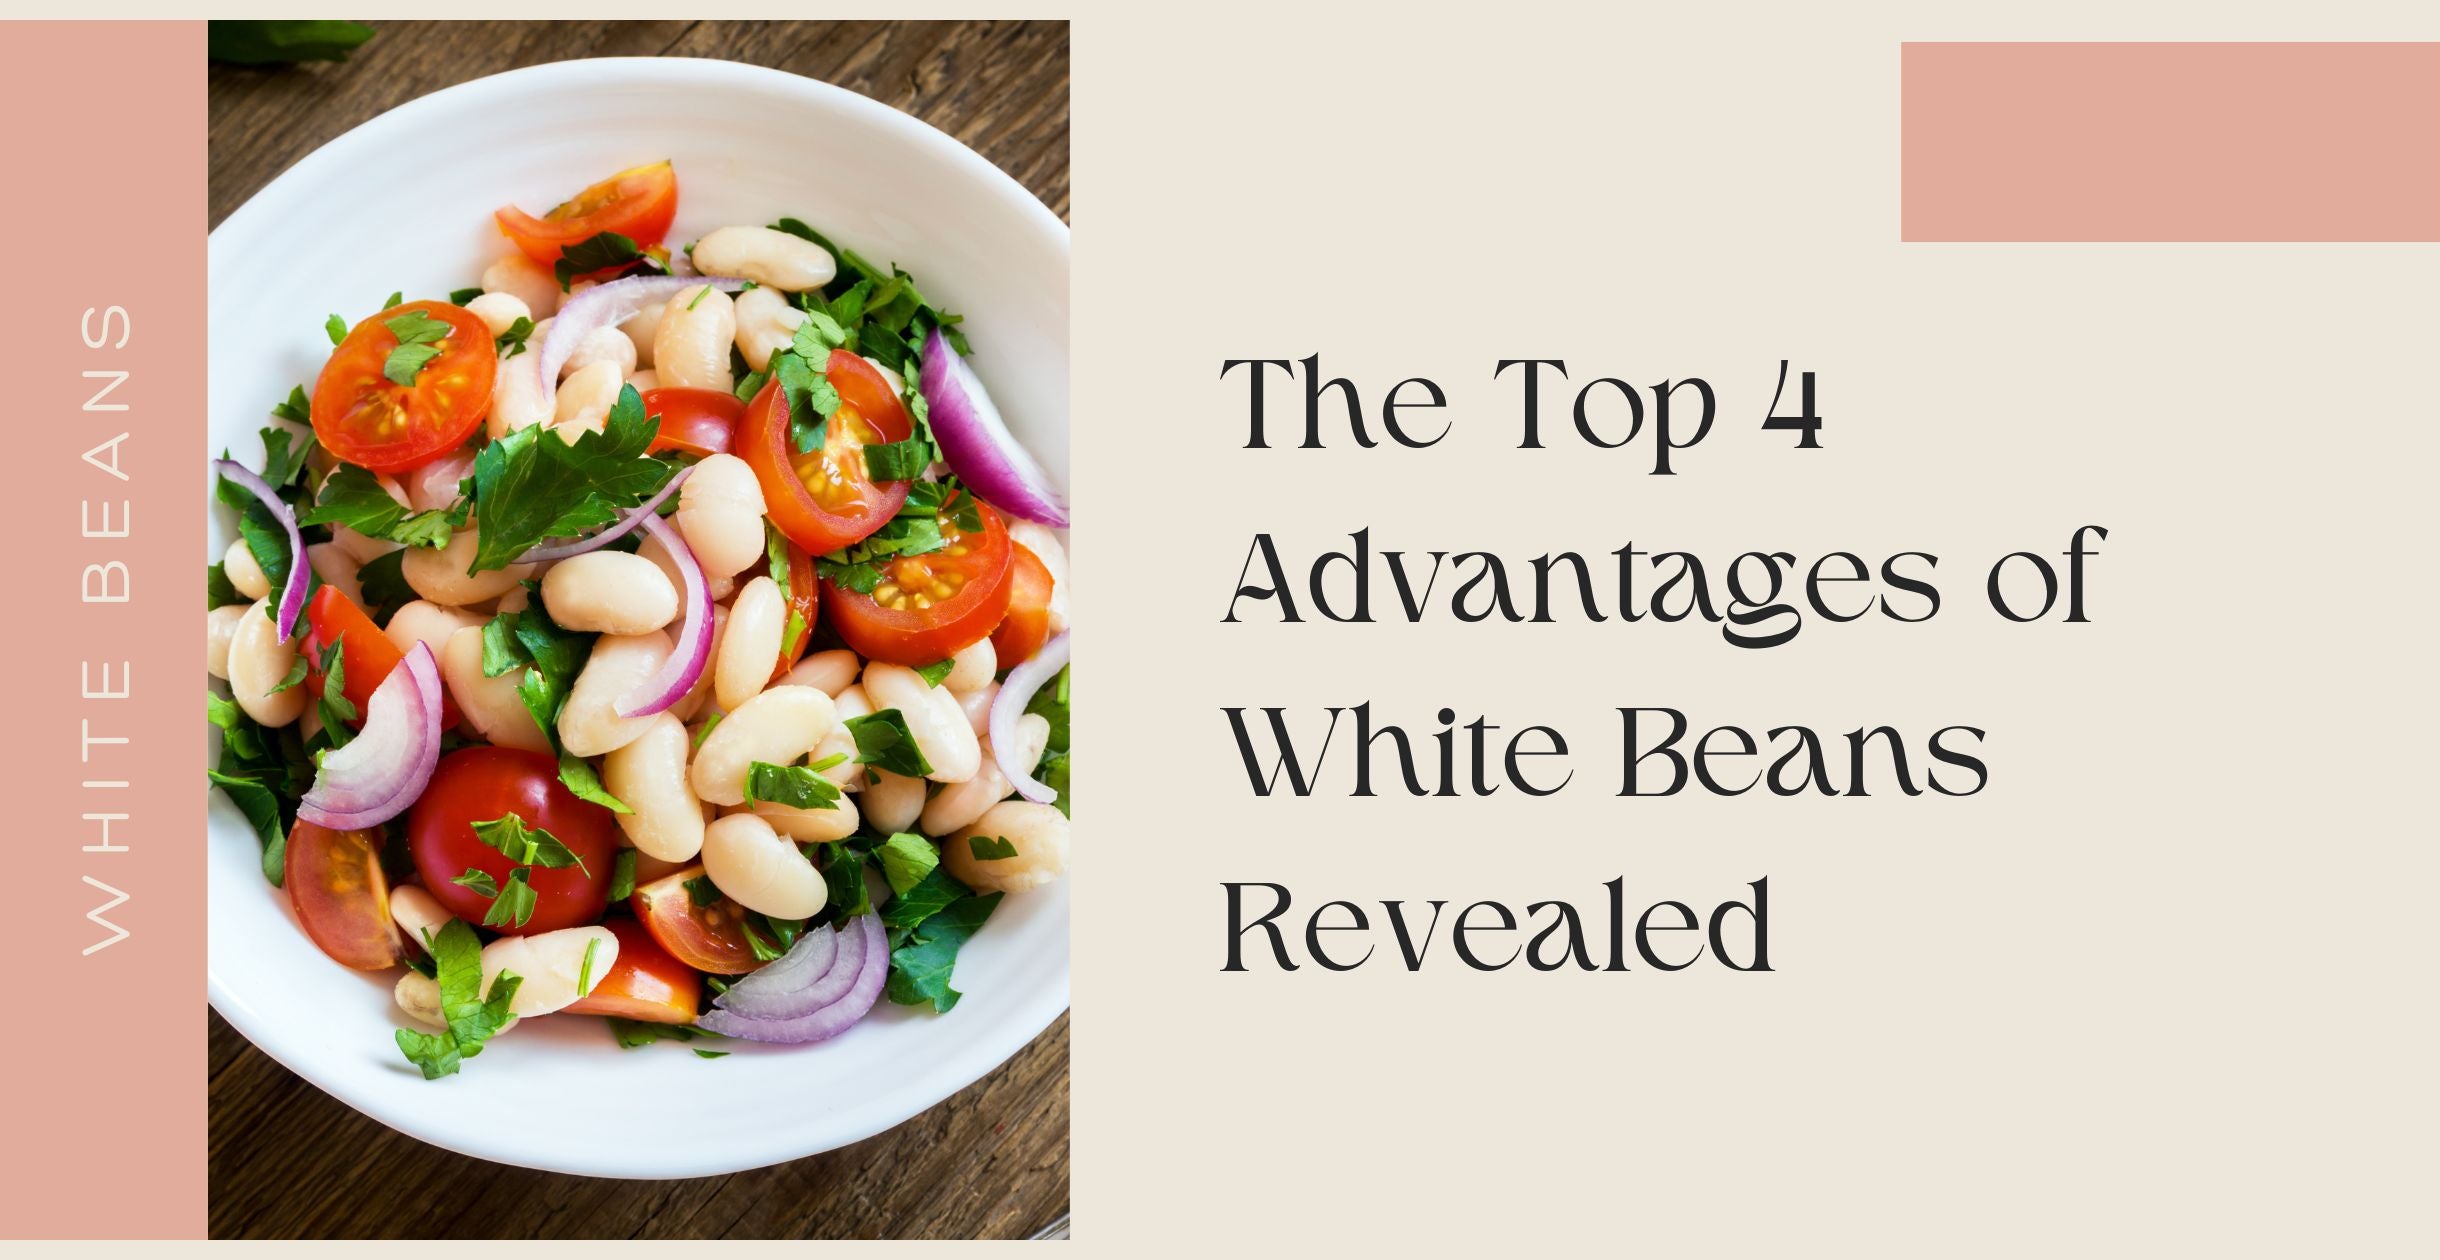 The Top 4 Advantages of White Beans Revealed